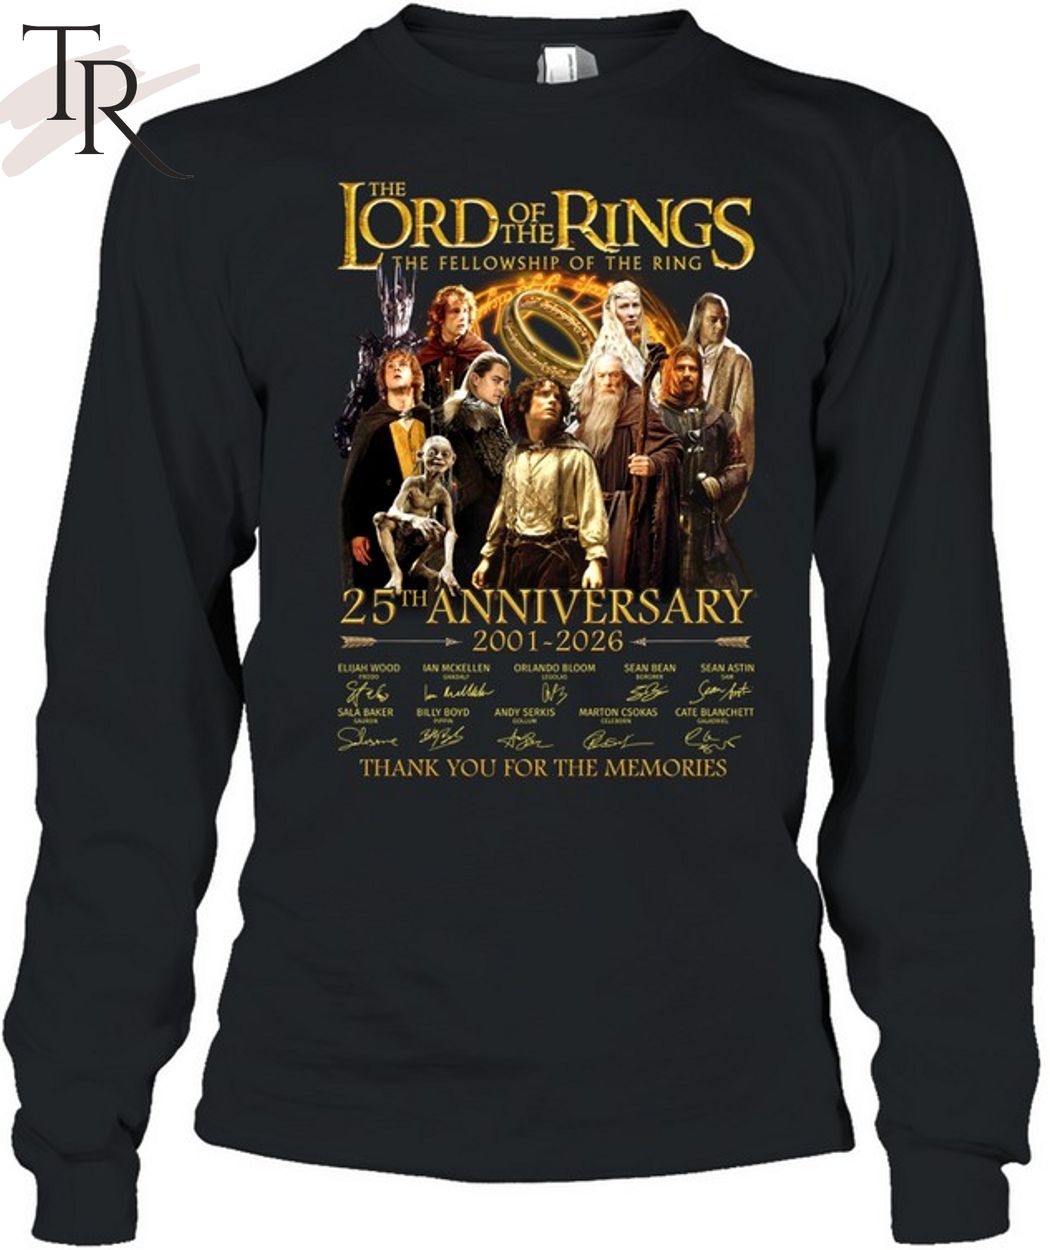 The Lord Of The Rings The Fellowship Of The Ring 25th Anniversary 2001-2026 Thank You For The Memories T-Shirt